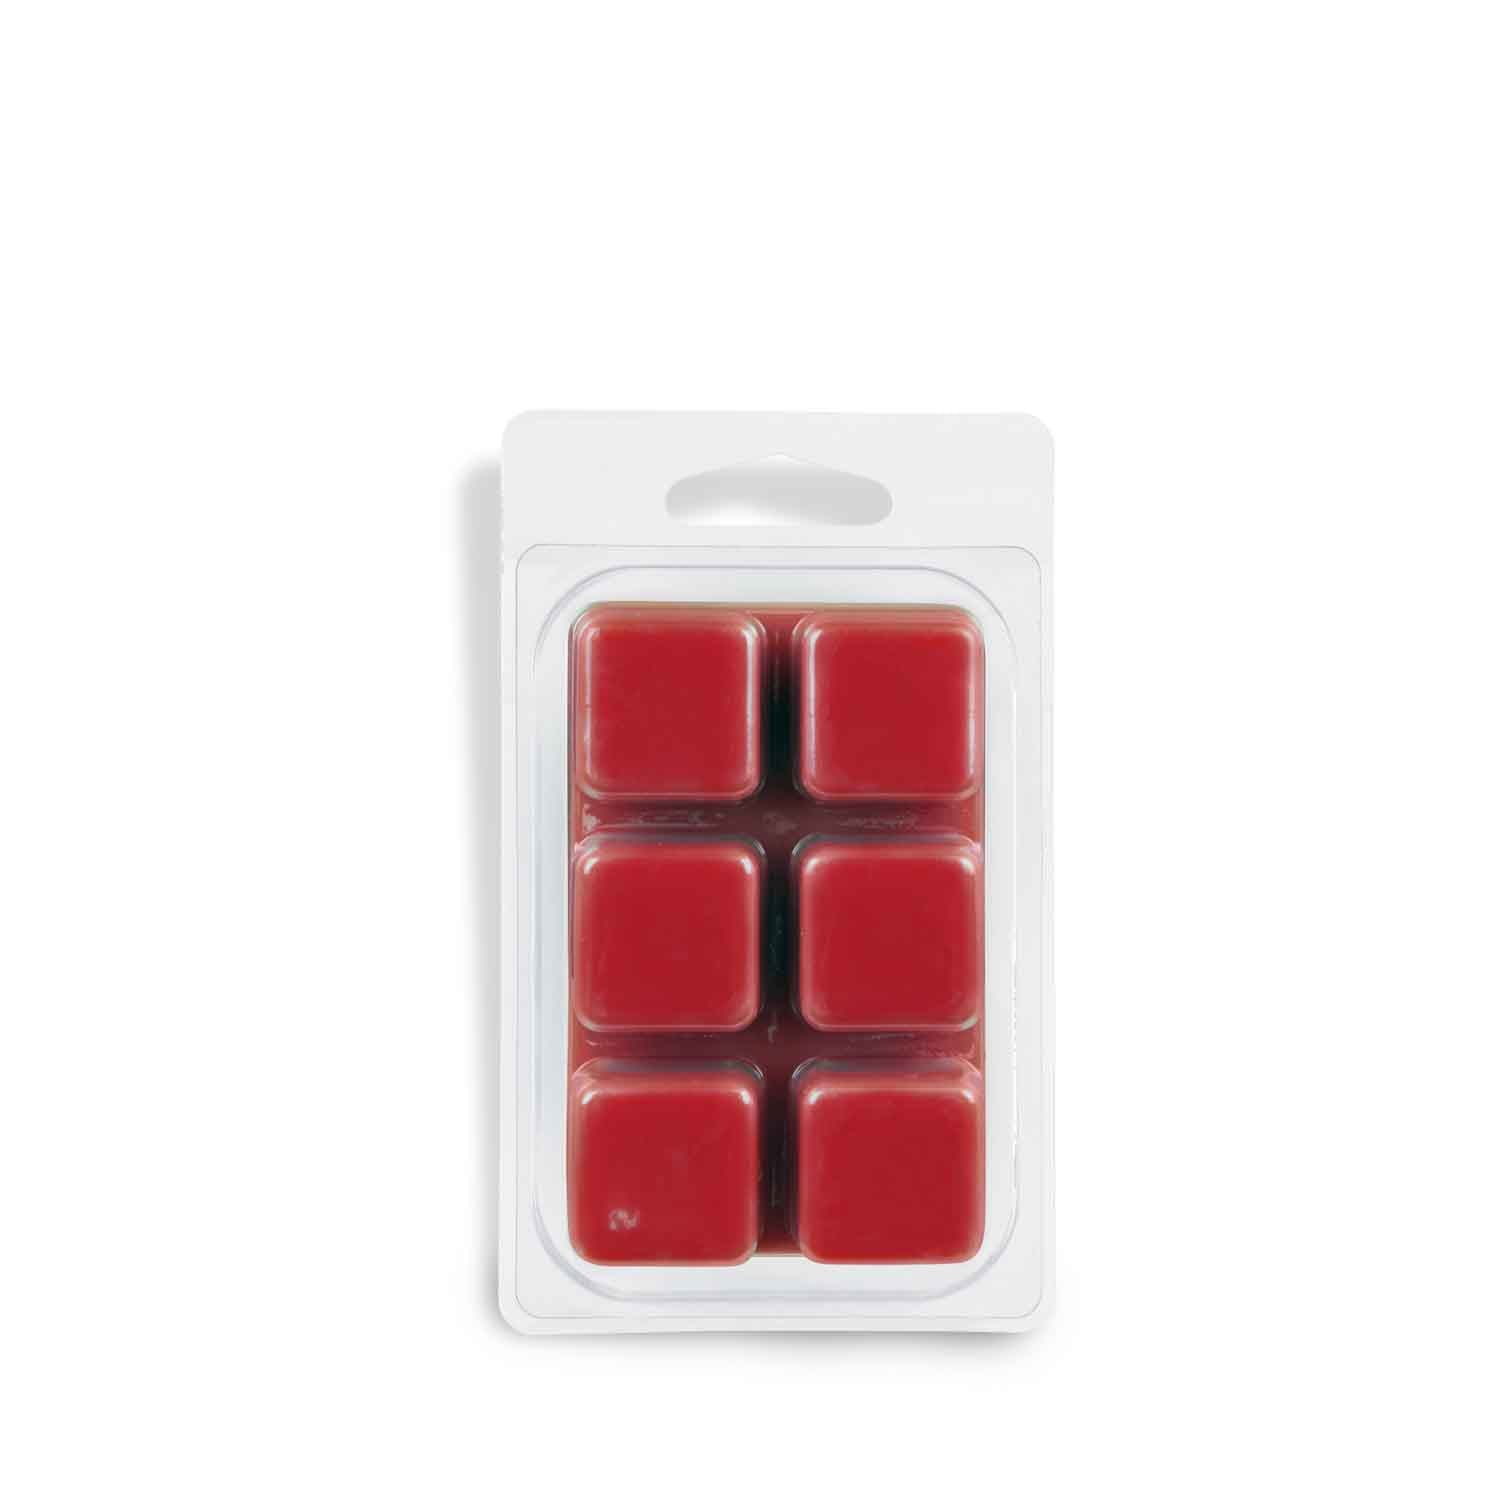 Mcintosh Apple Soy Wax Melts Wax Melts for Warmer, Scented Melts